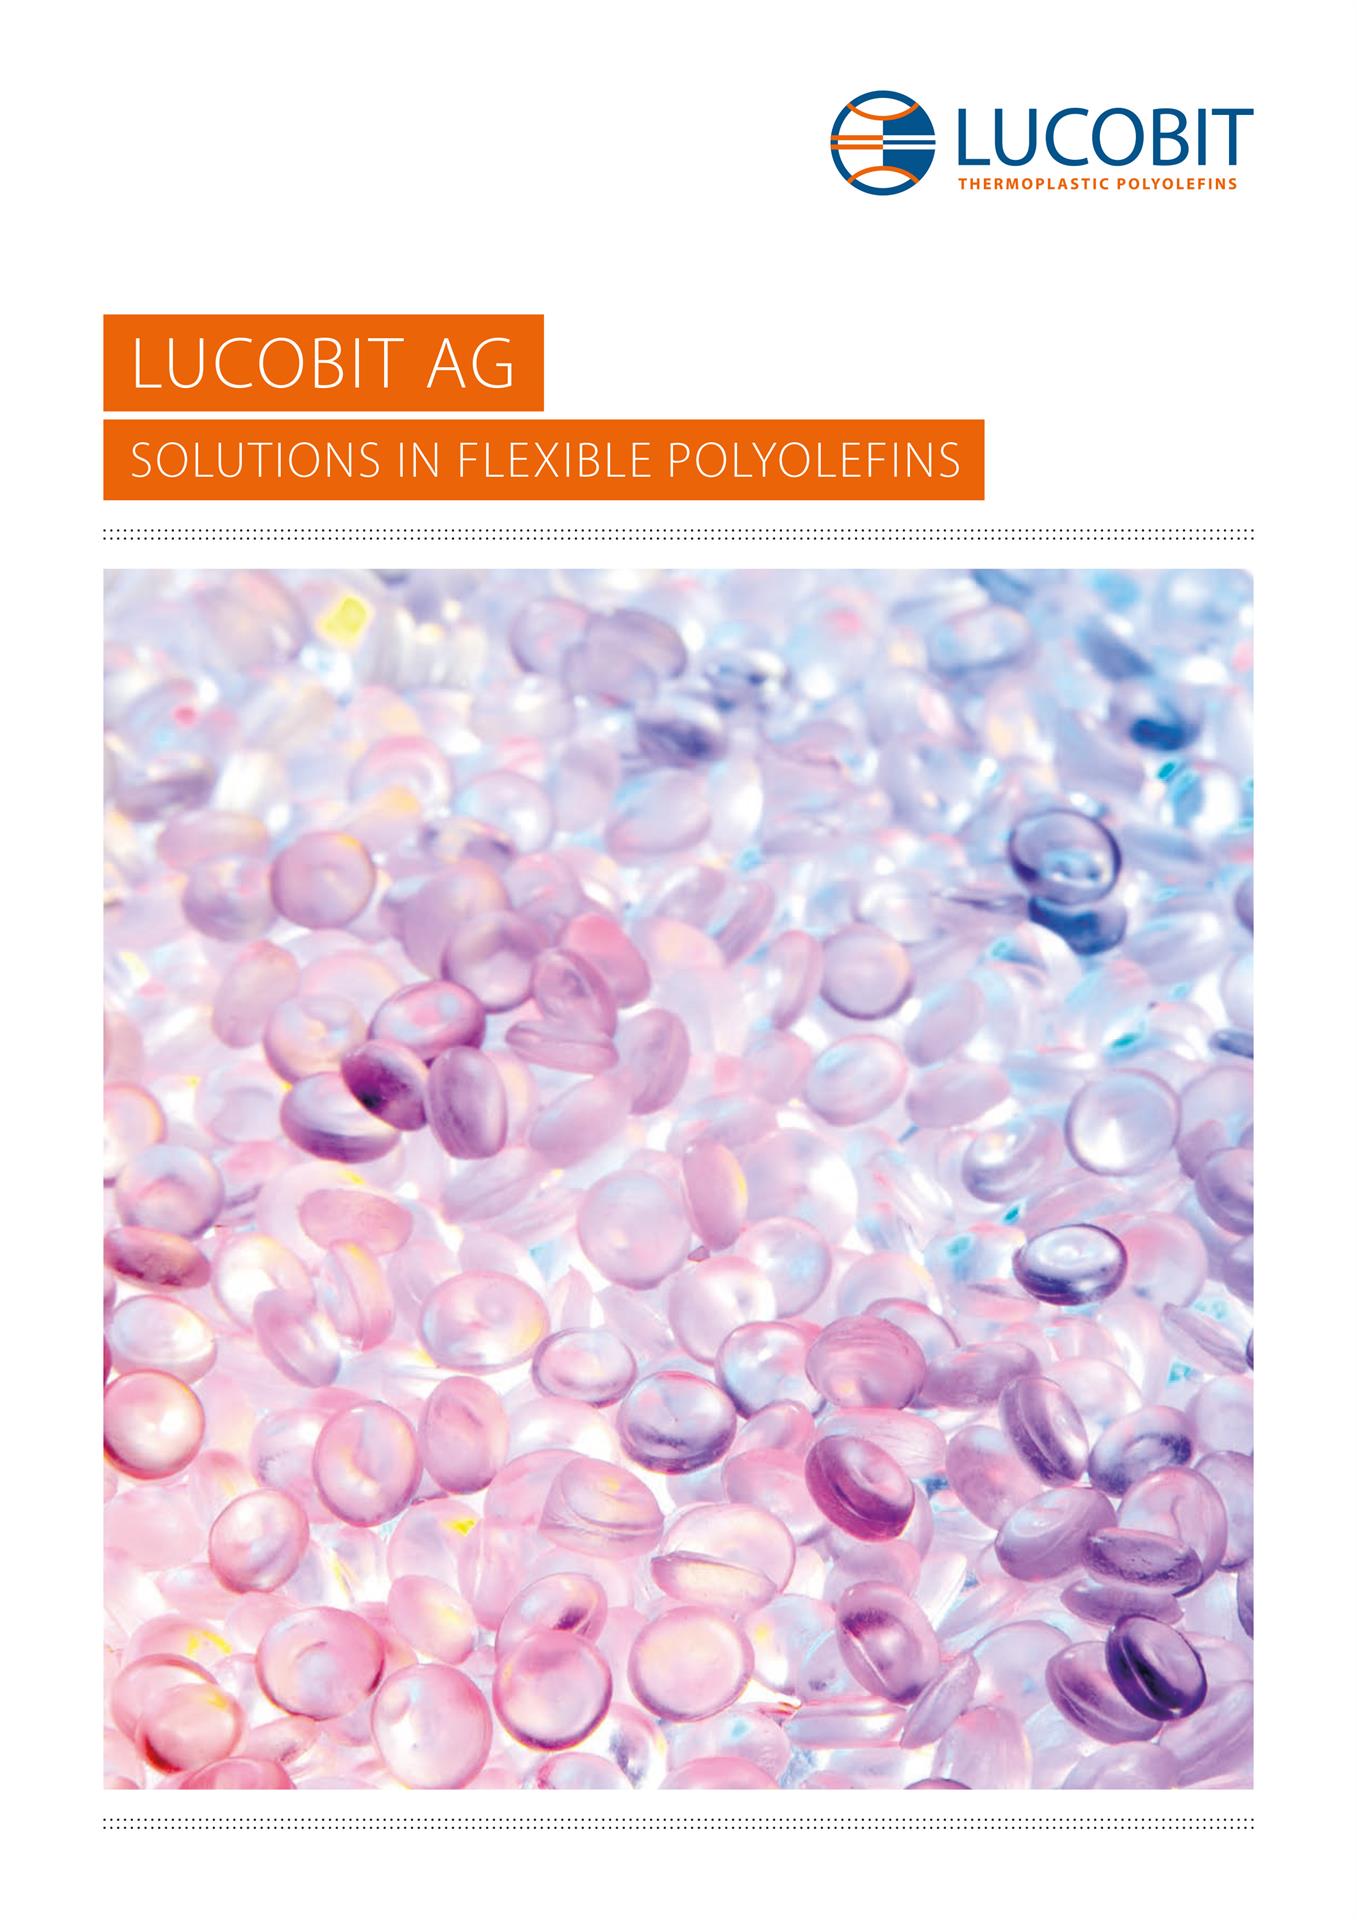 LUCOBIT Broschüre - LUCOBIT AG SOLUTIONS IN FLEXIBLE POLYOLEFINS